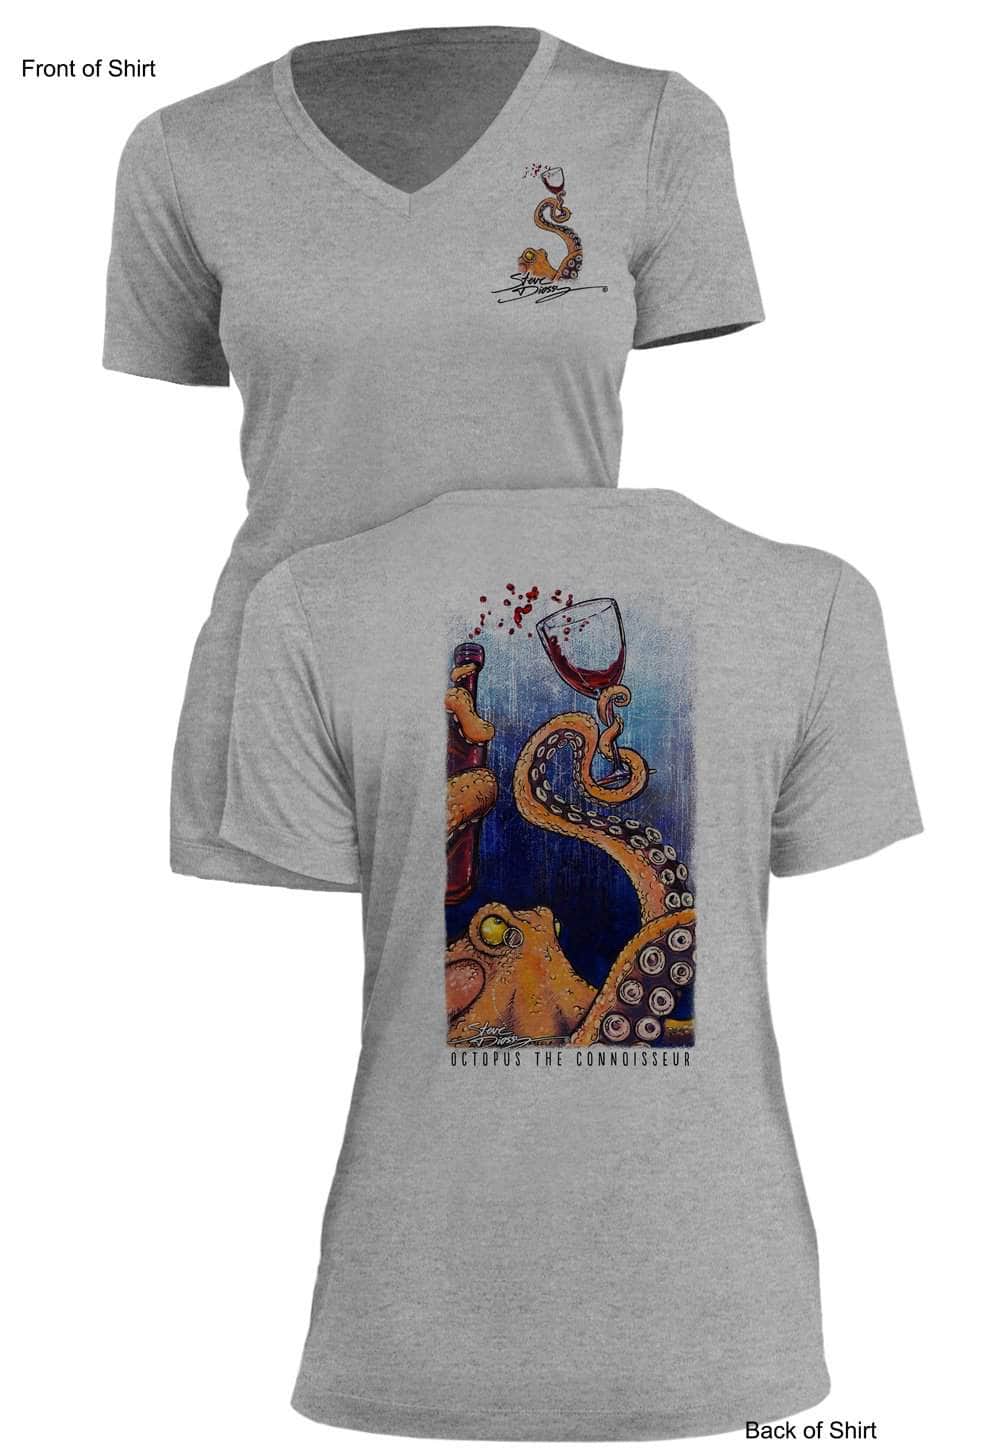 Octopus the Connoisseur- Ladies Short Sleeve V-Neck-100% Polyester